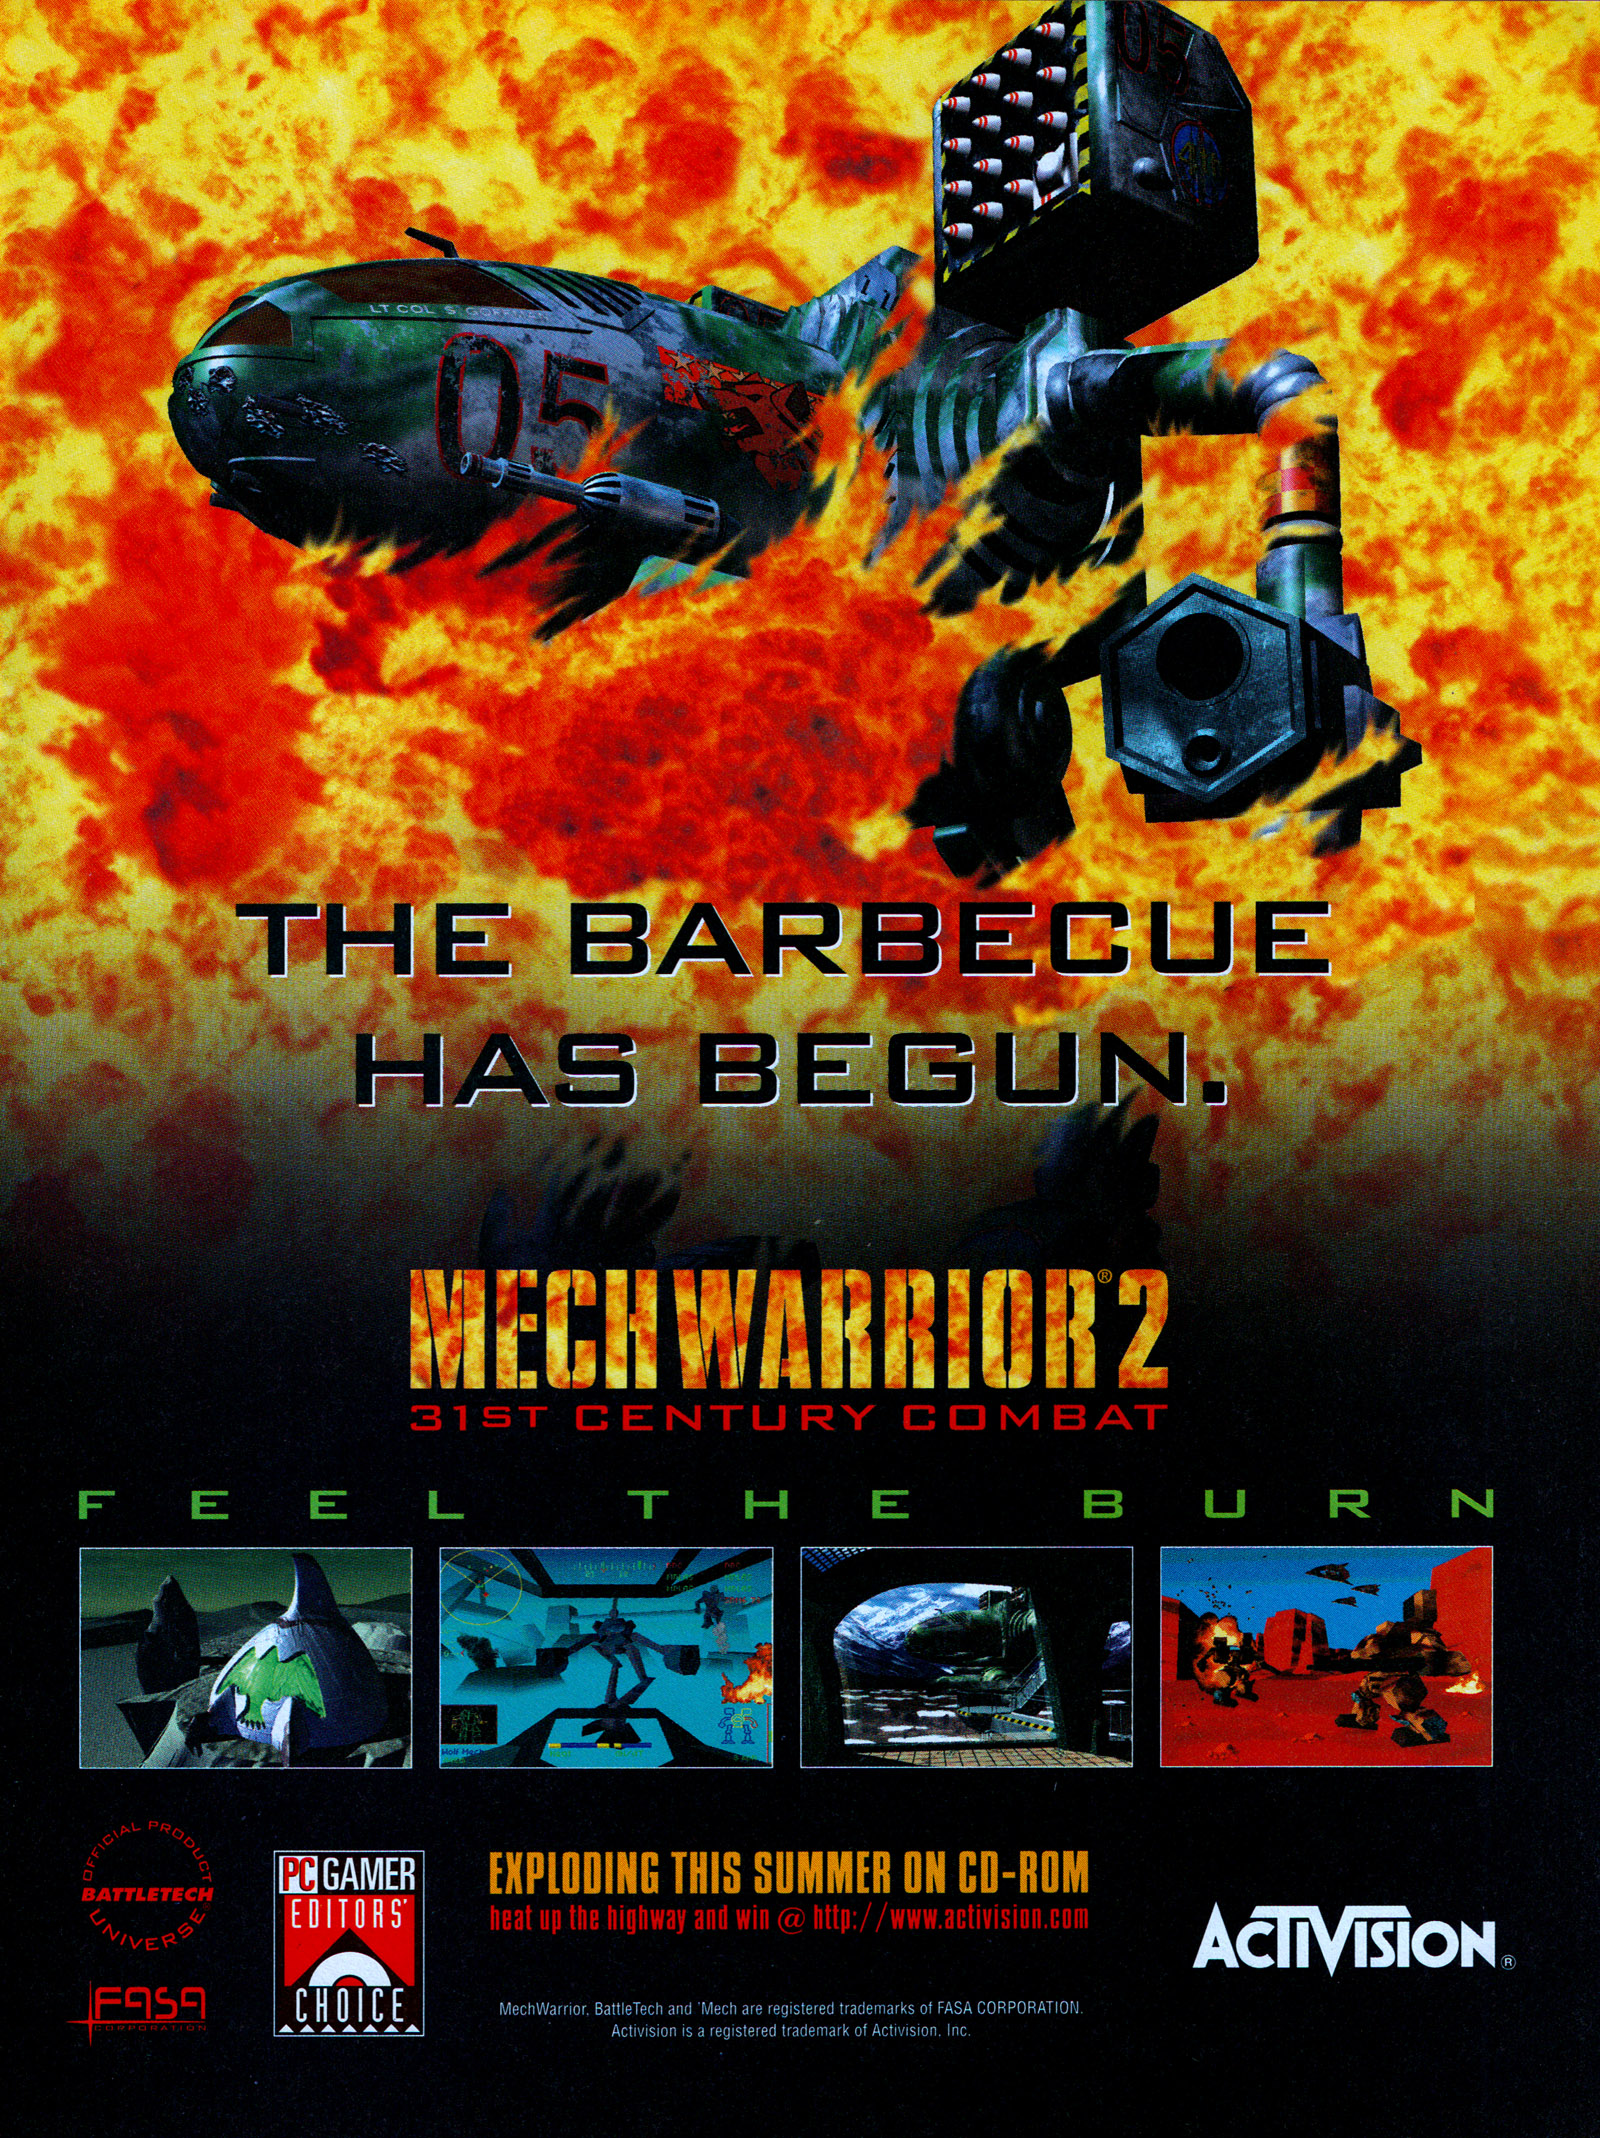 Once upon a time, Activision made more than just Guitar Hero and Call of Duty. MechWarrior 2 is a mech simulator based on the popular BattleTech property. It was one […]